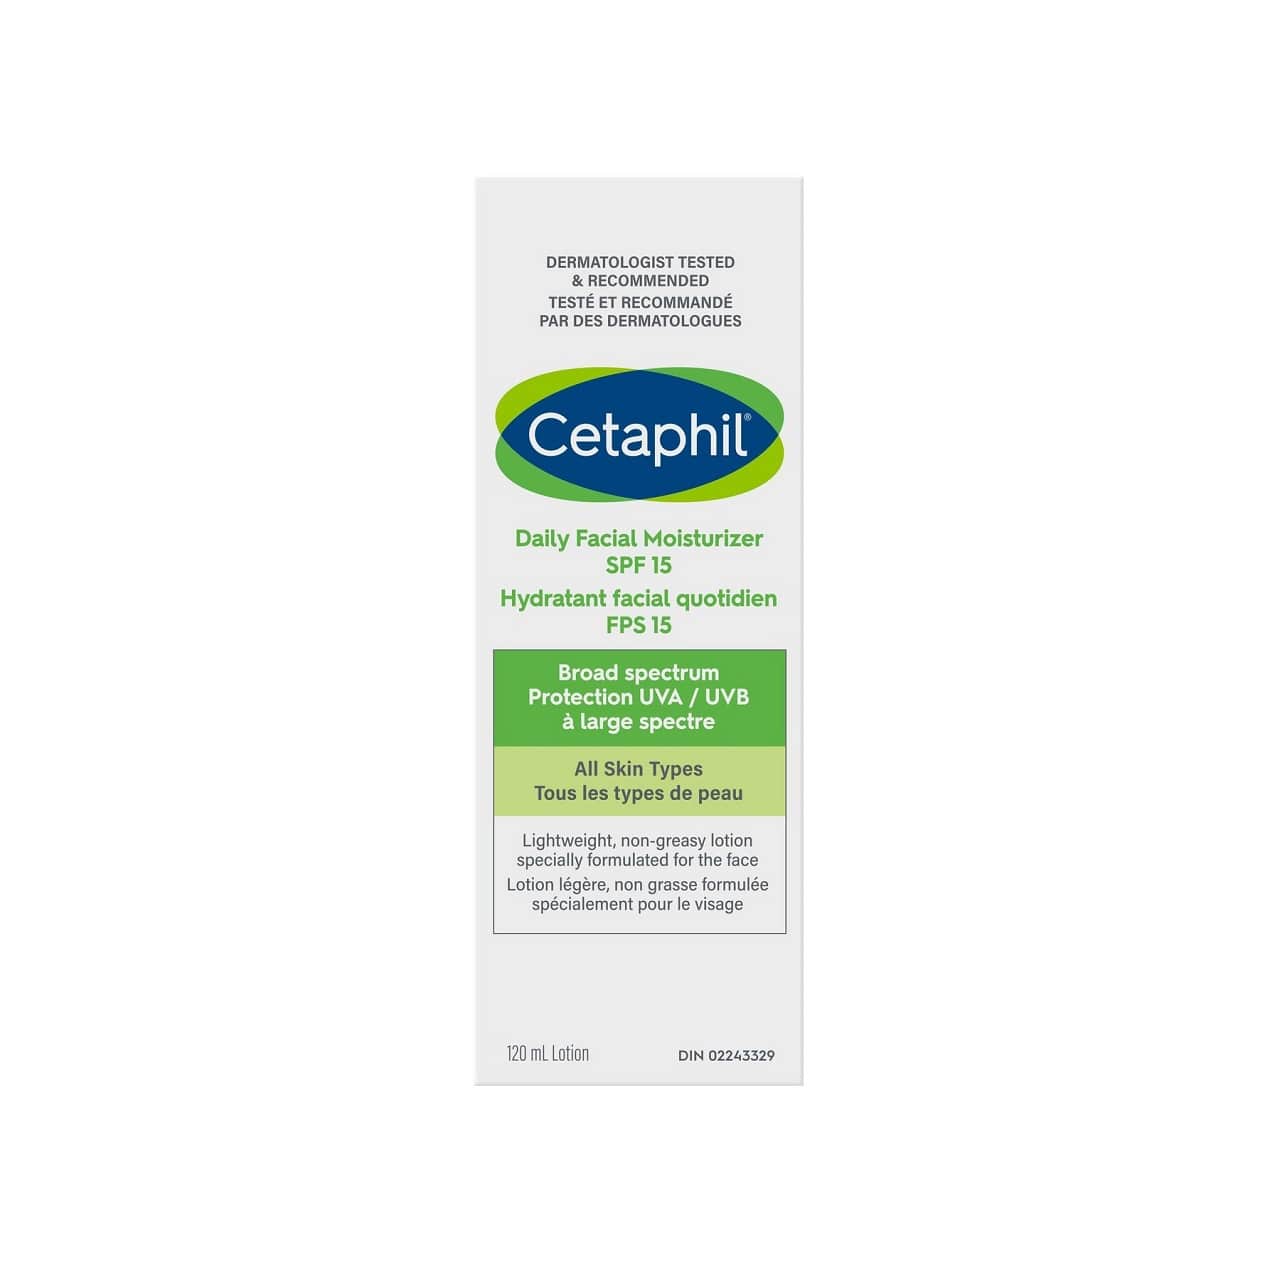 Product label for Cetaphil Daily Facial Moisturizer SPF 15 (120 mL)